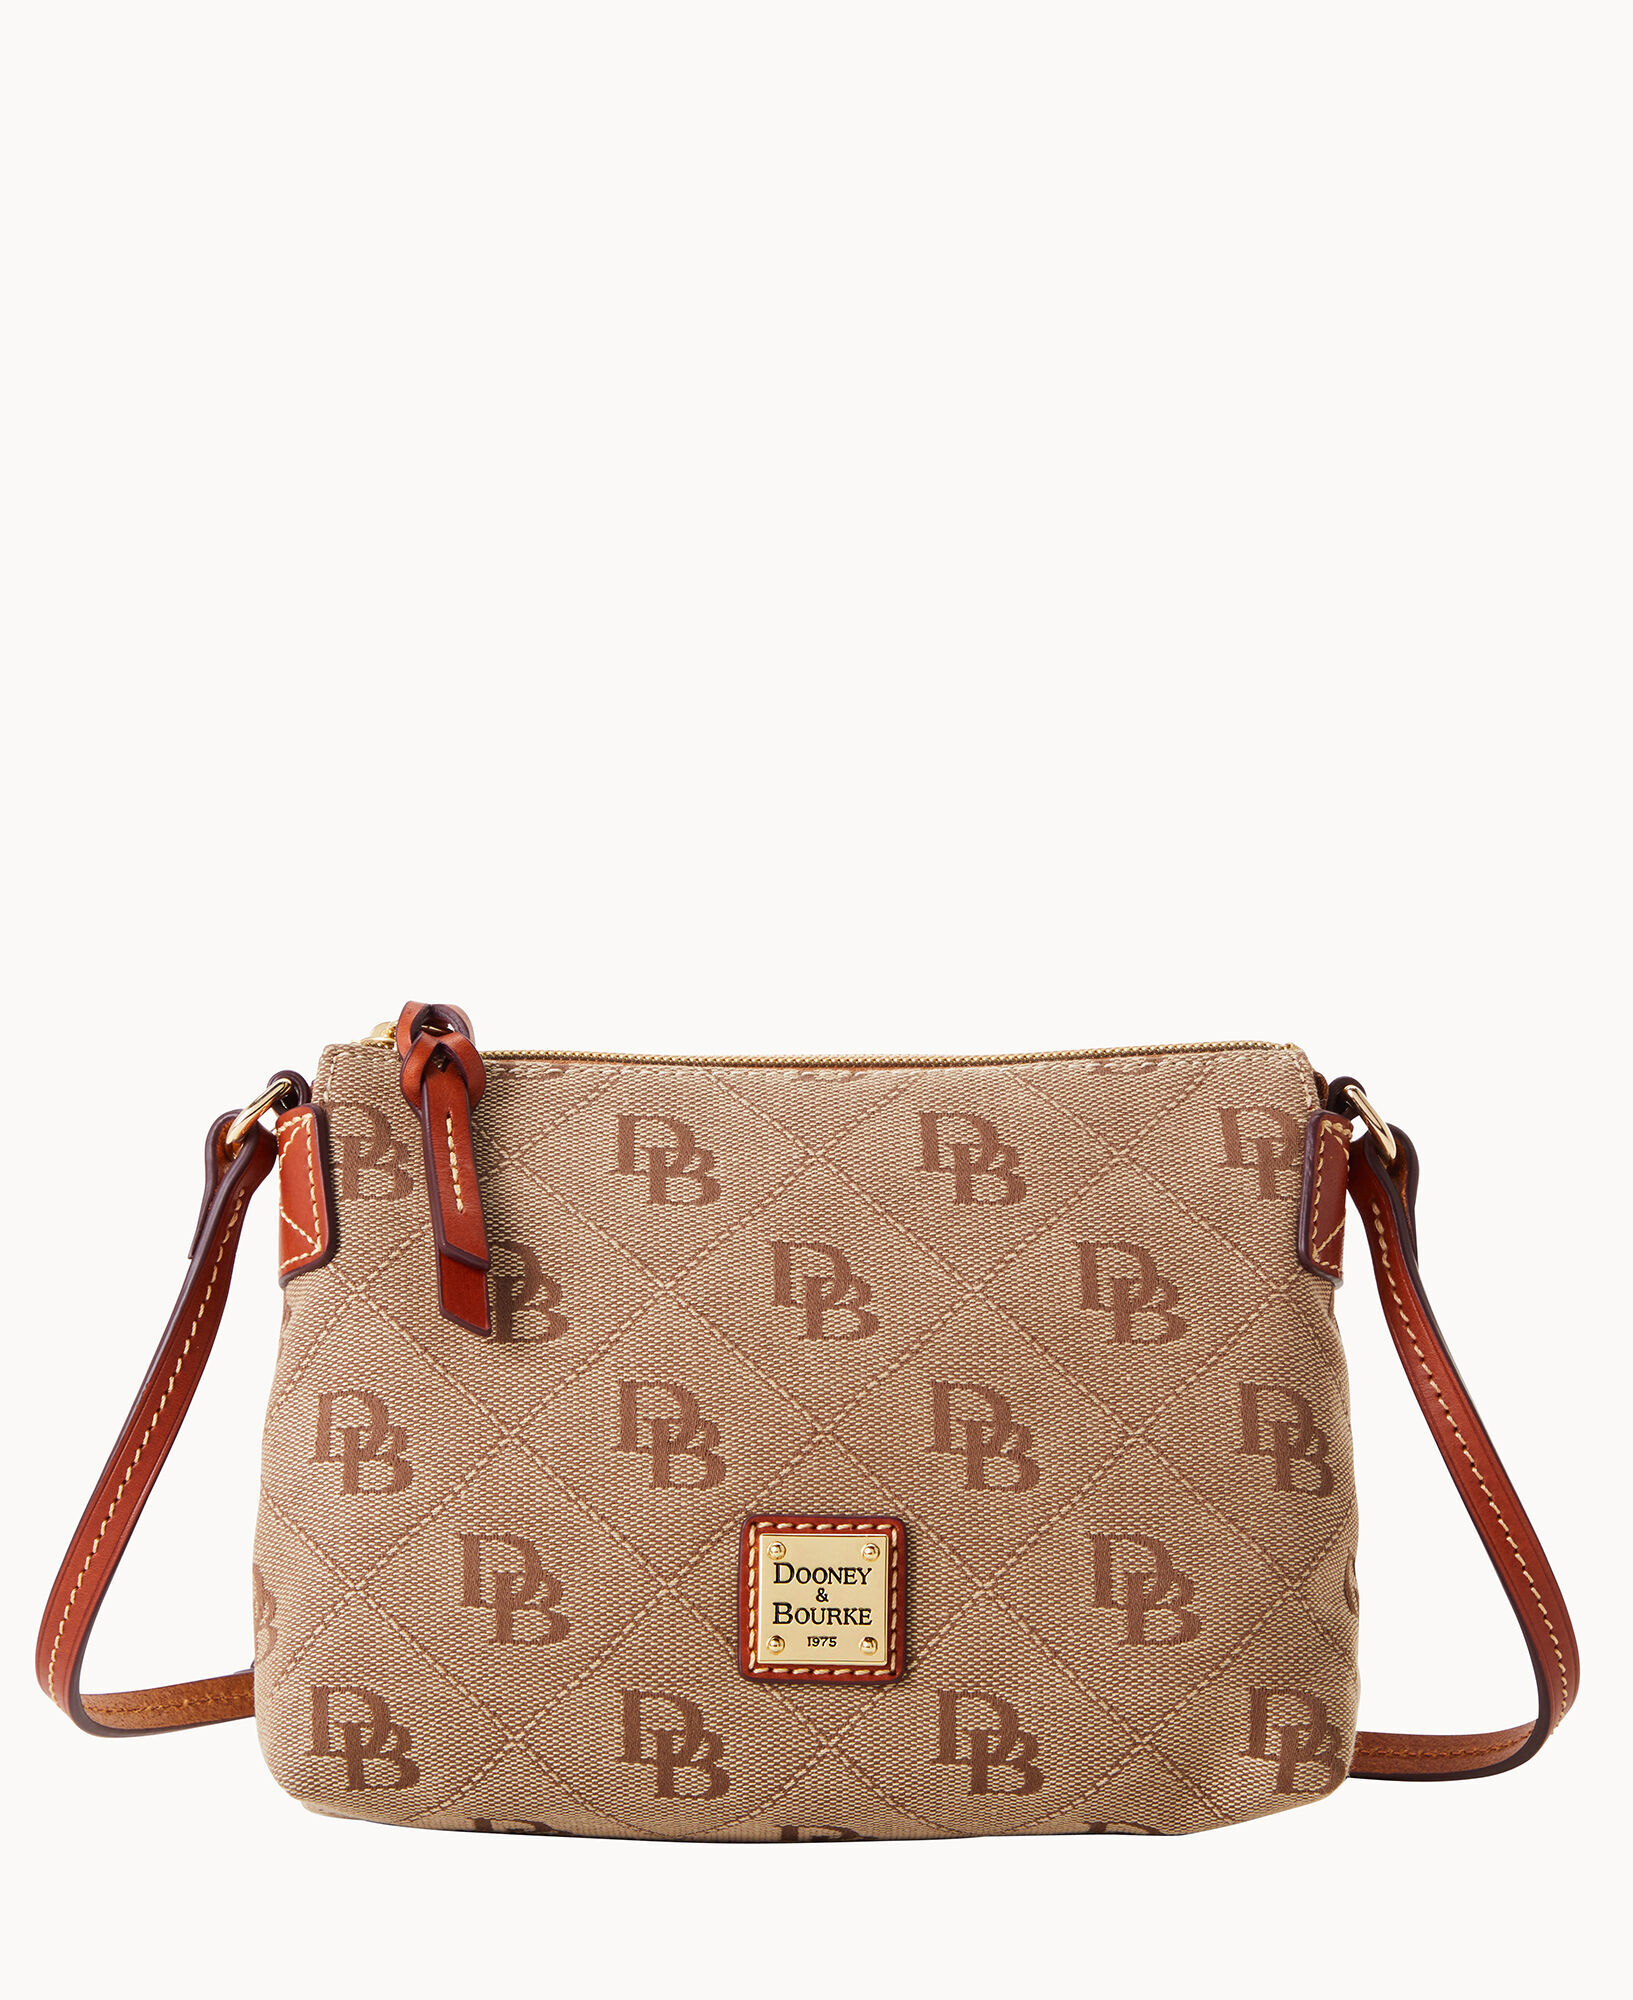 Vegan Leather Quilted Crossbody Bag –